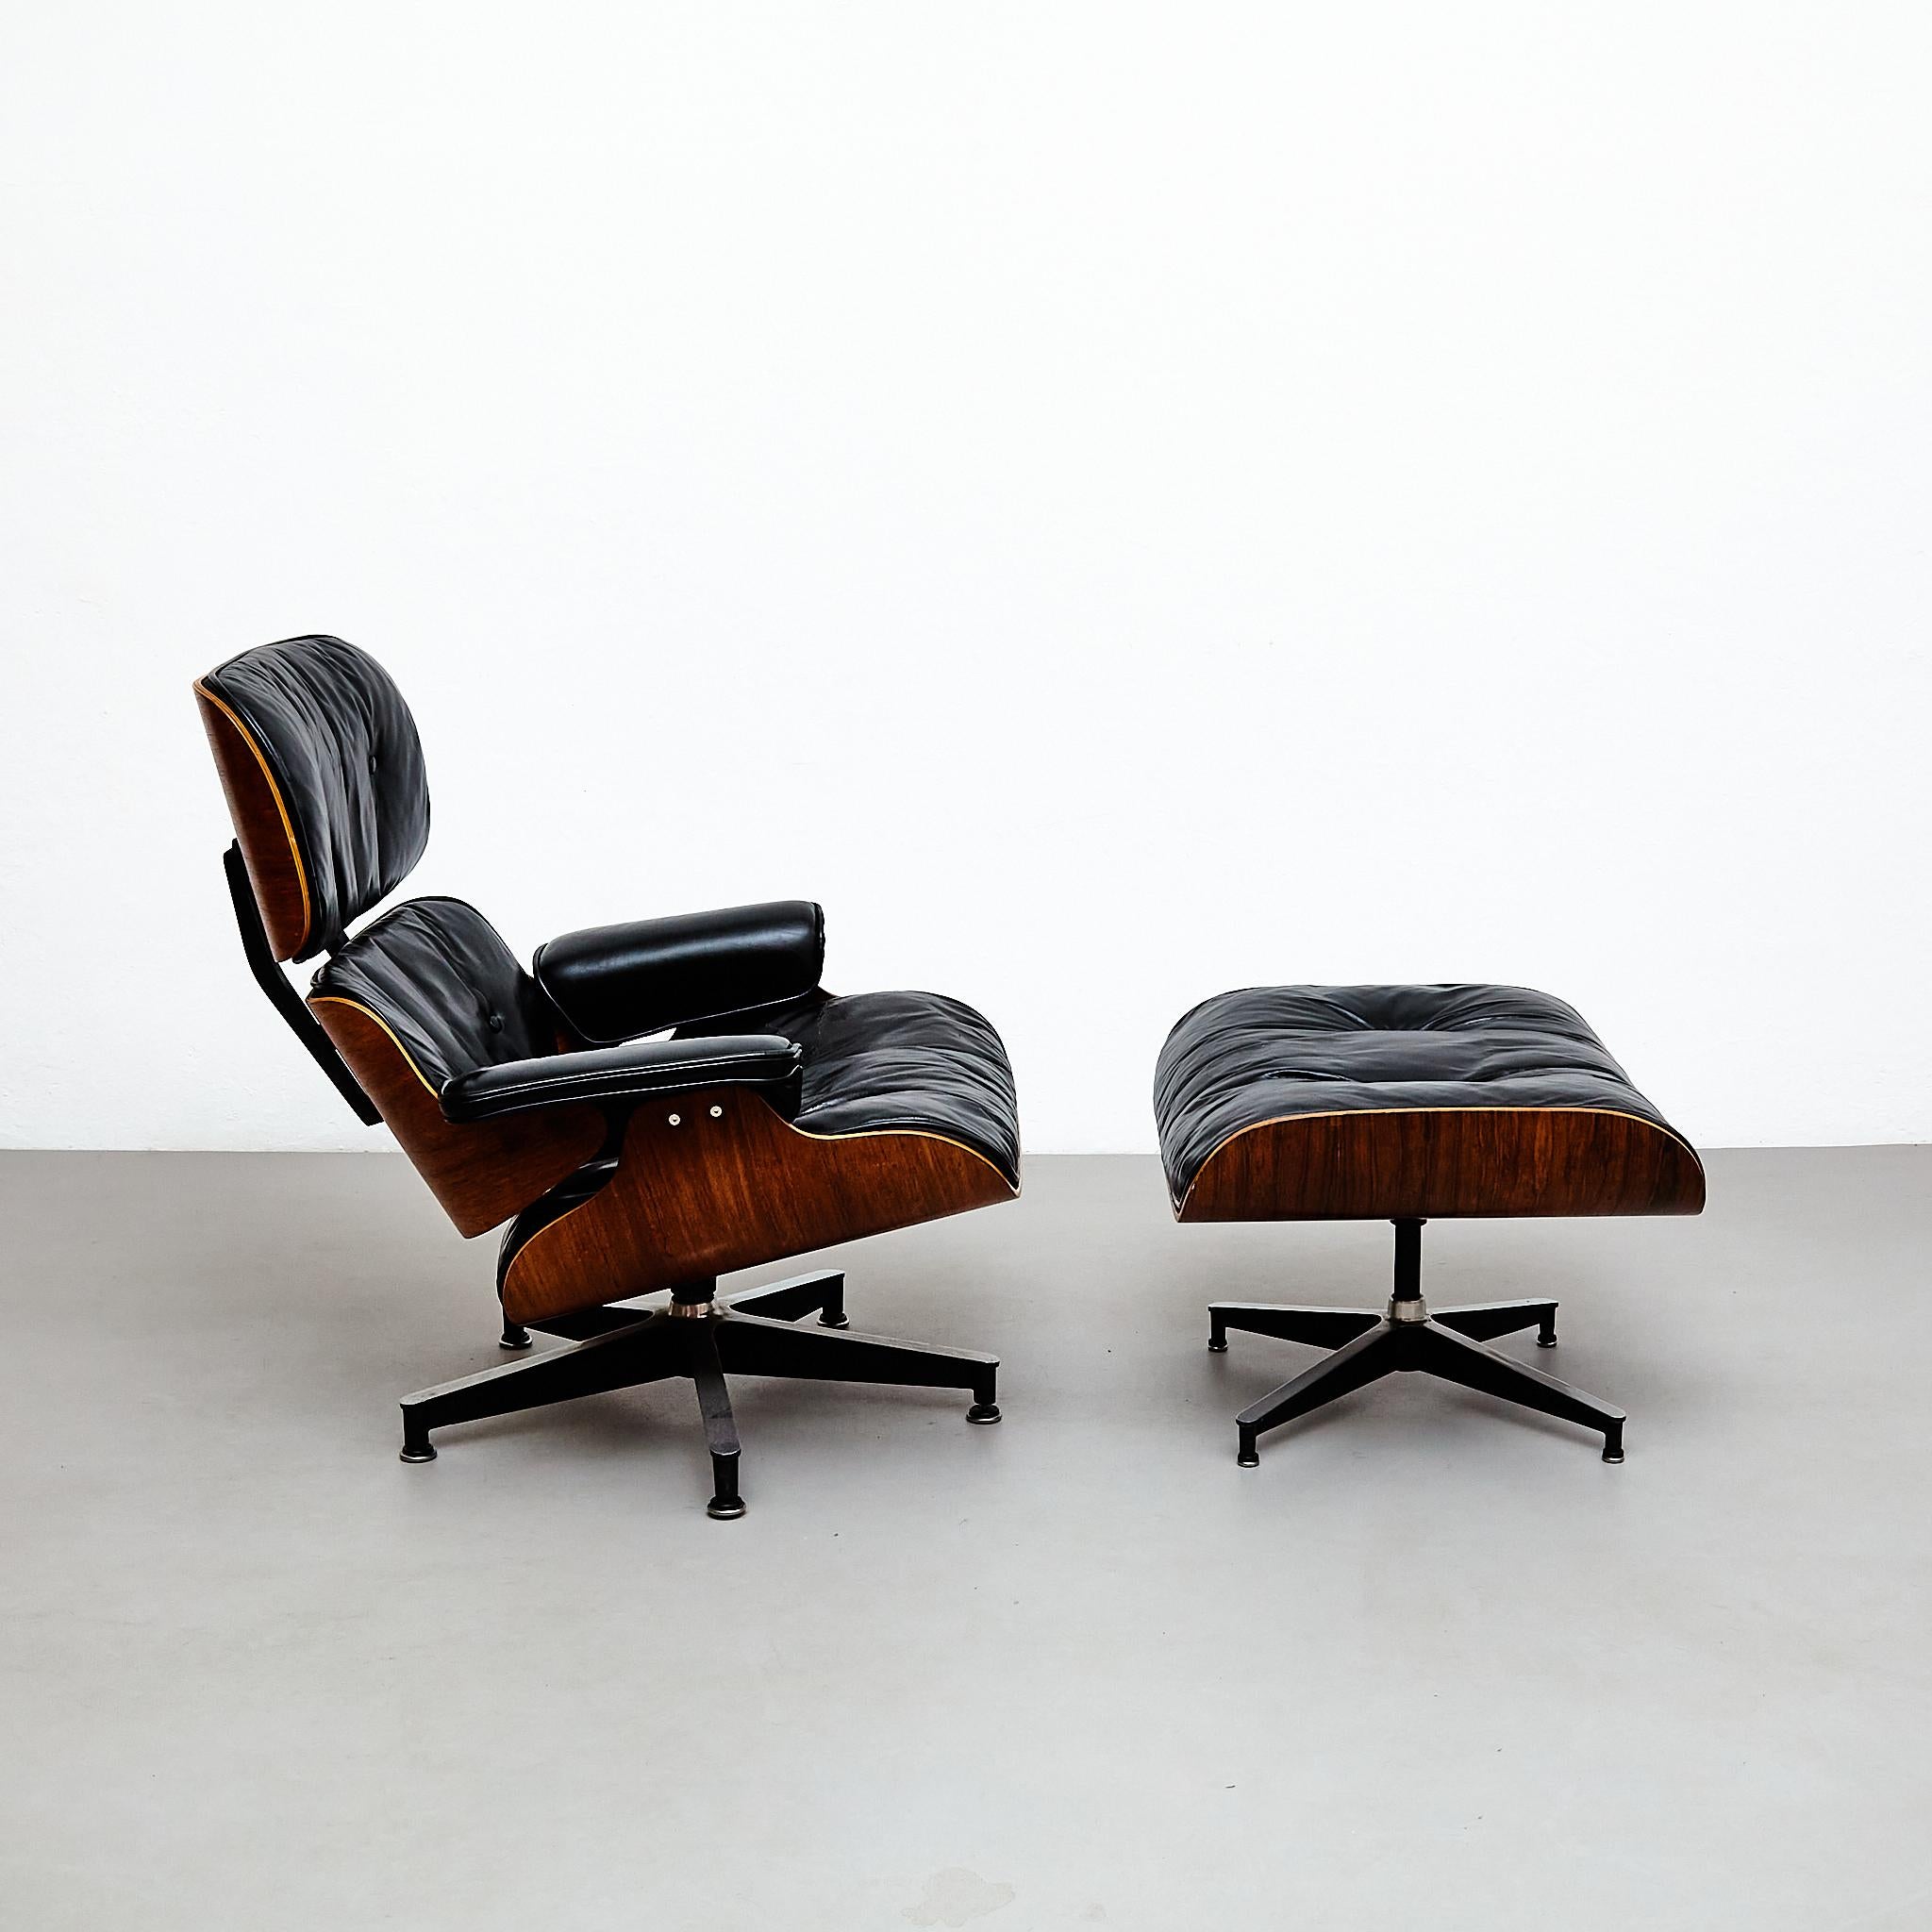 The Eames Lounge Chair and Ottoman, designed by Charles and Ray Eames, is a timeless and iconic piece of furniture that embodies comfort, craftsmanship, and modern design. Manufactured by Herman Miller in Zeeland, United States, this particular